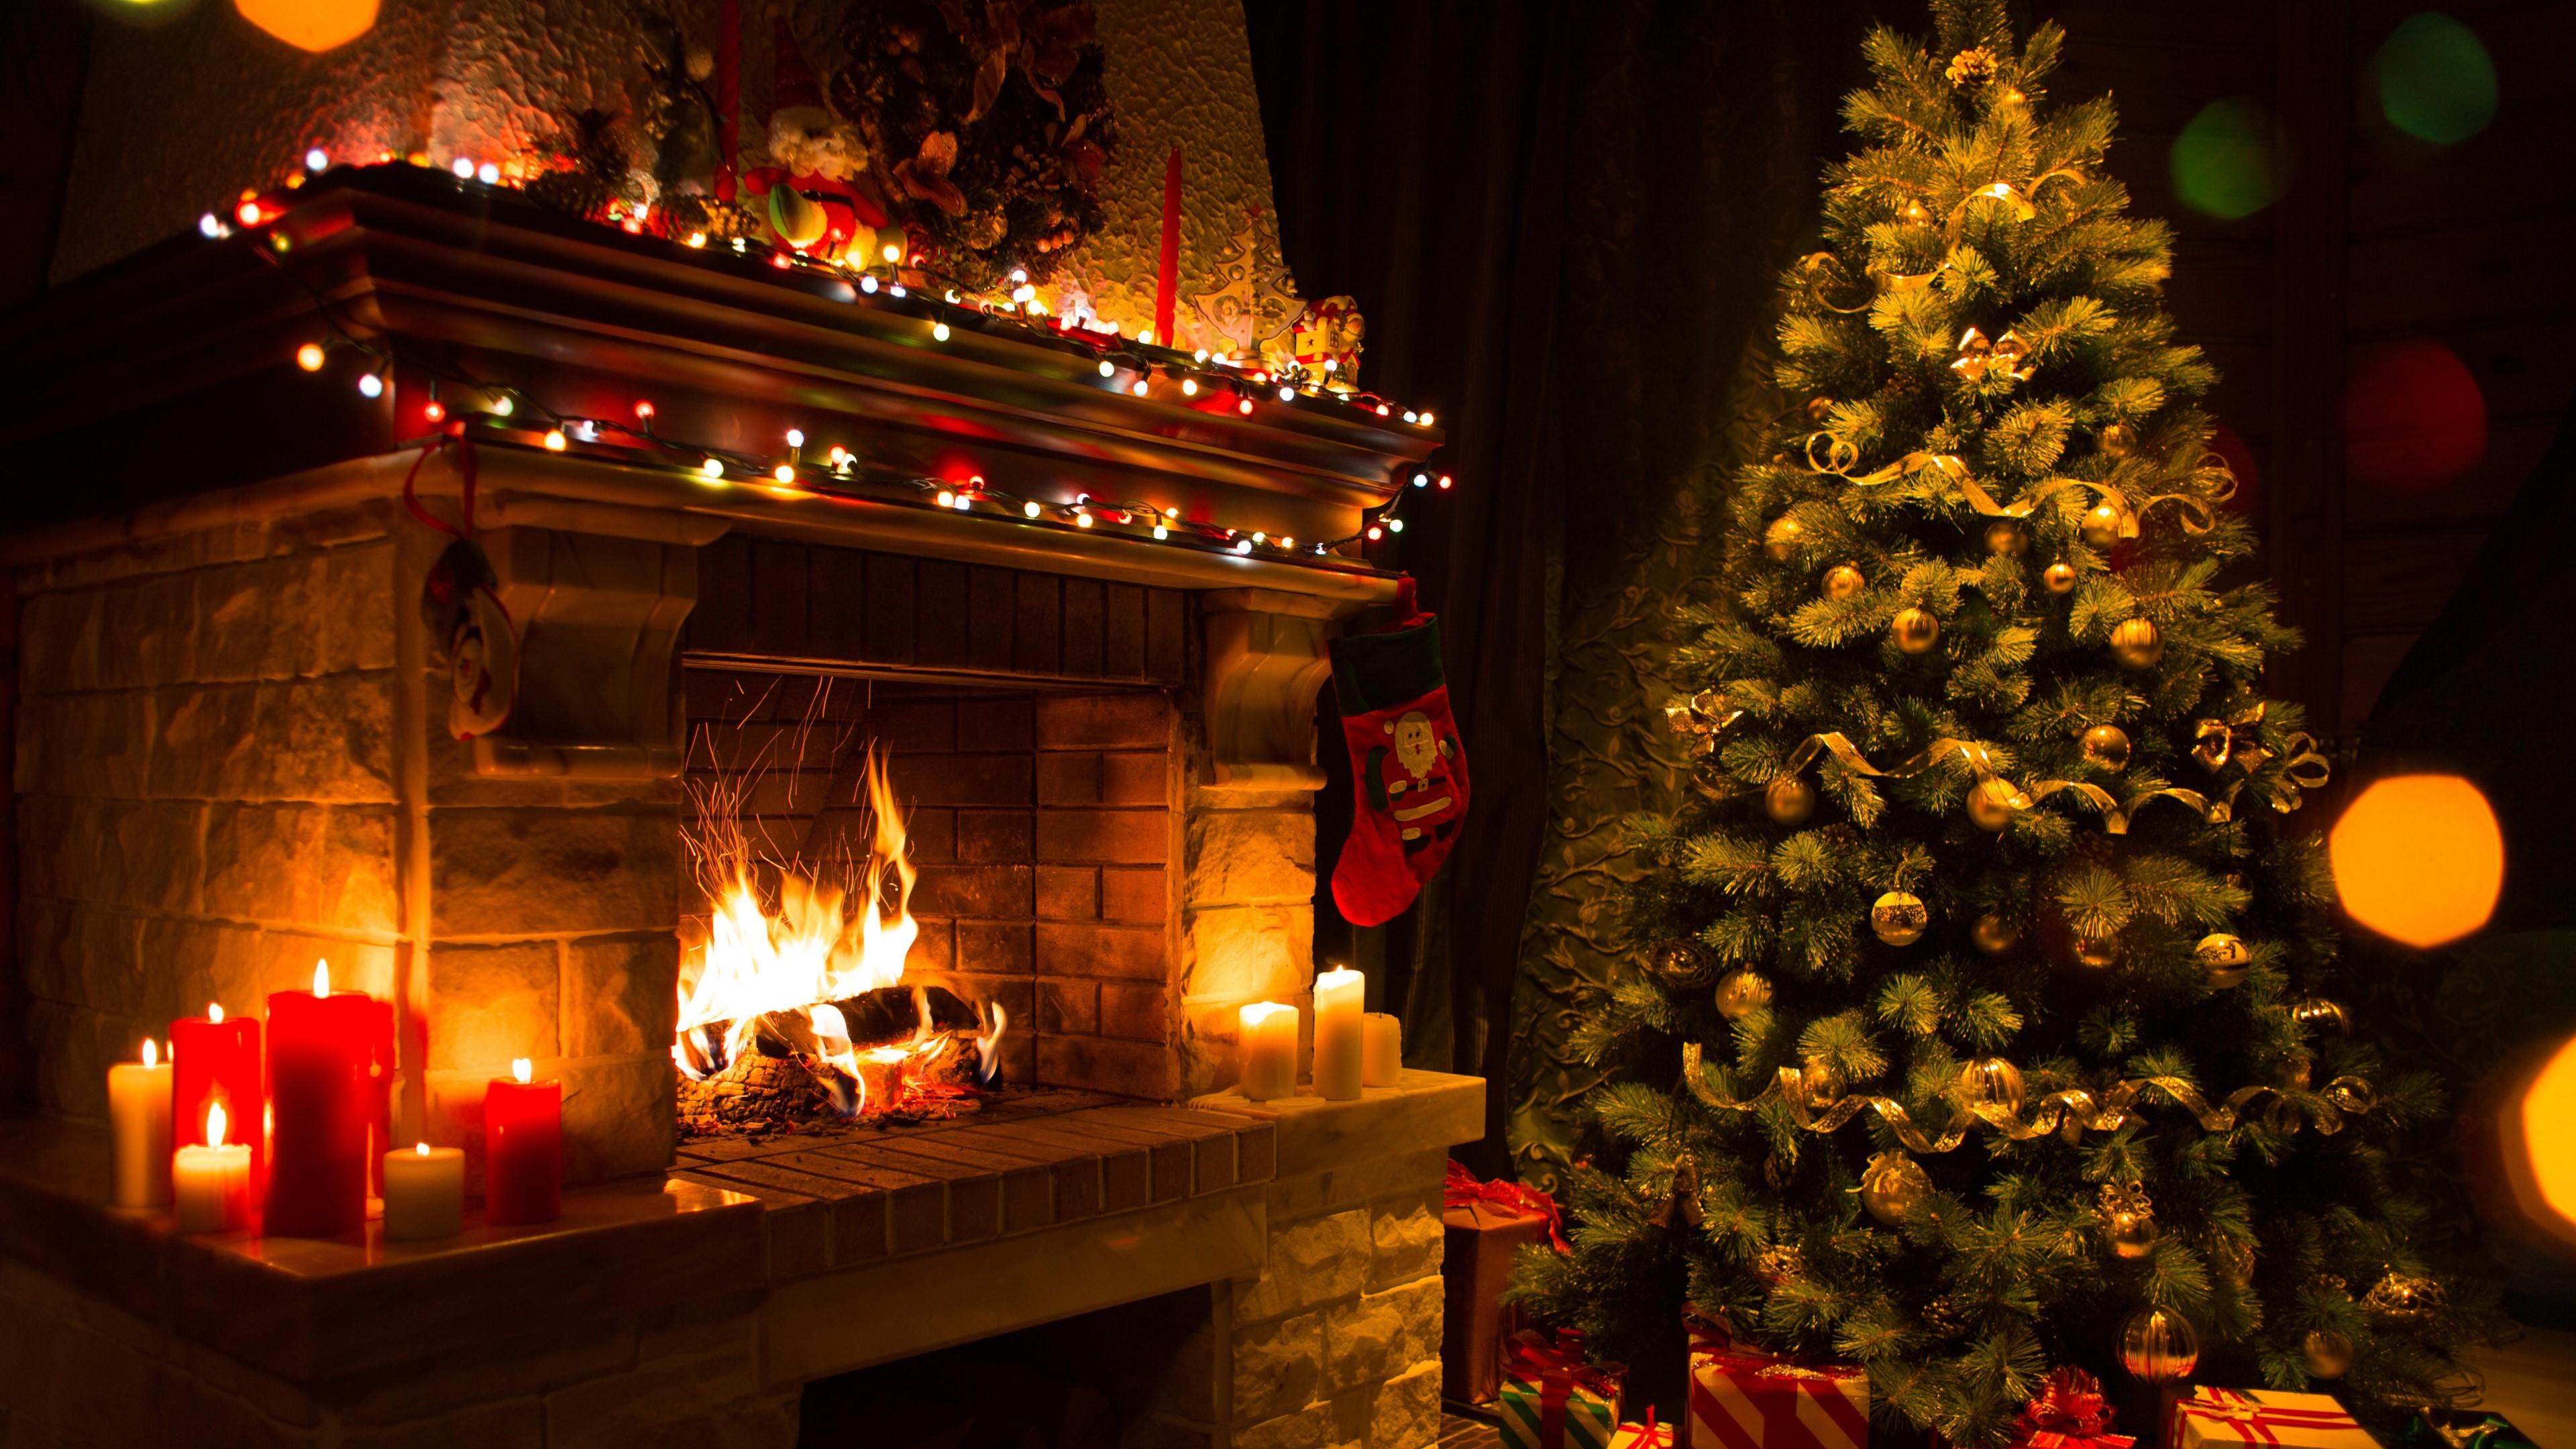 Free download Christmas Fireplace Wallpaper Top Christmas Fireplace [3840x2160] for your Desktop, Mobile & Tablet. Explore Christmas Fireplace Wallpaper. Christmas Fireplace Wallpaper, Christmas Fireplace Background, Christmas Fireplace Wallpaper